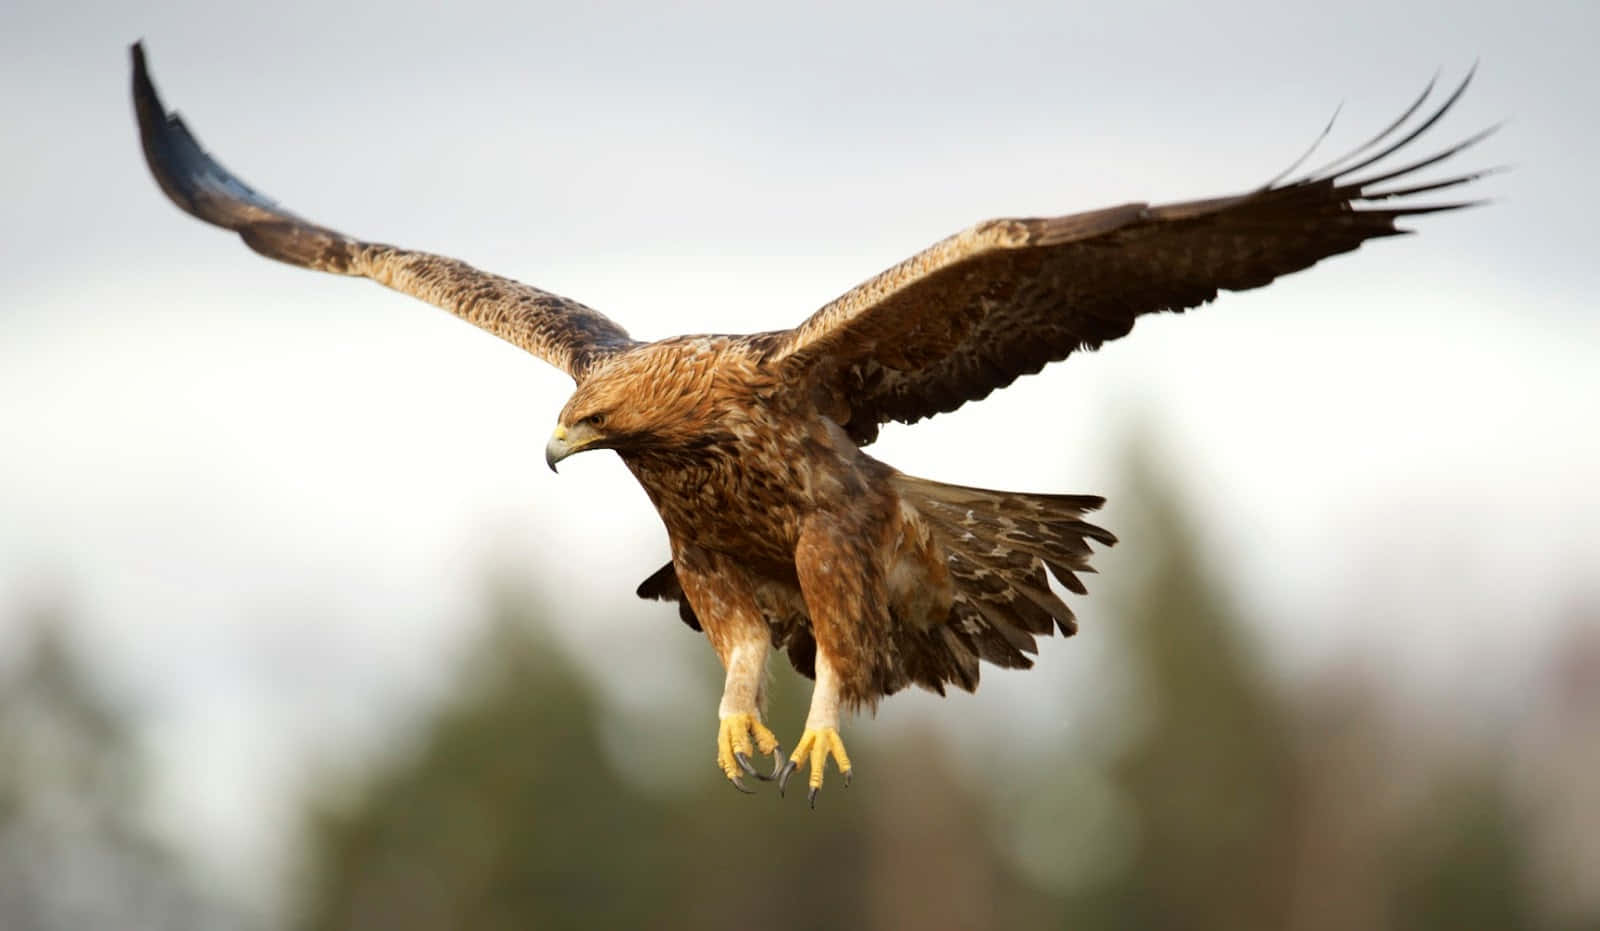 An intimidating Golden Eagle looks out over its hunting grounds